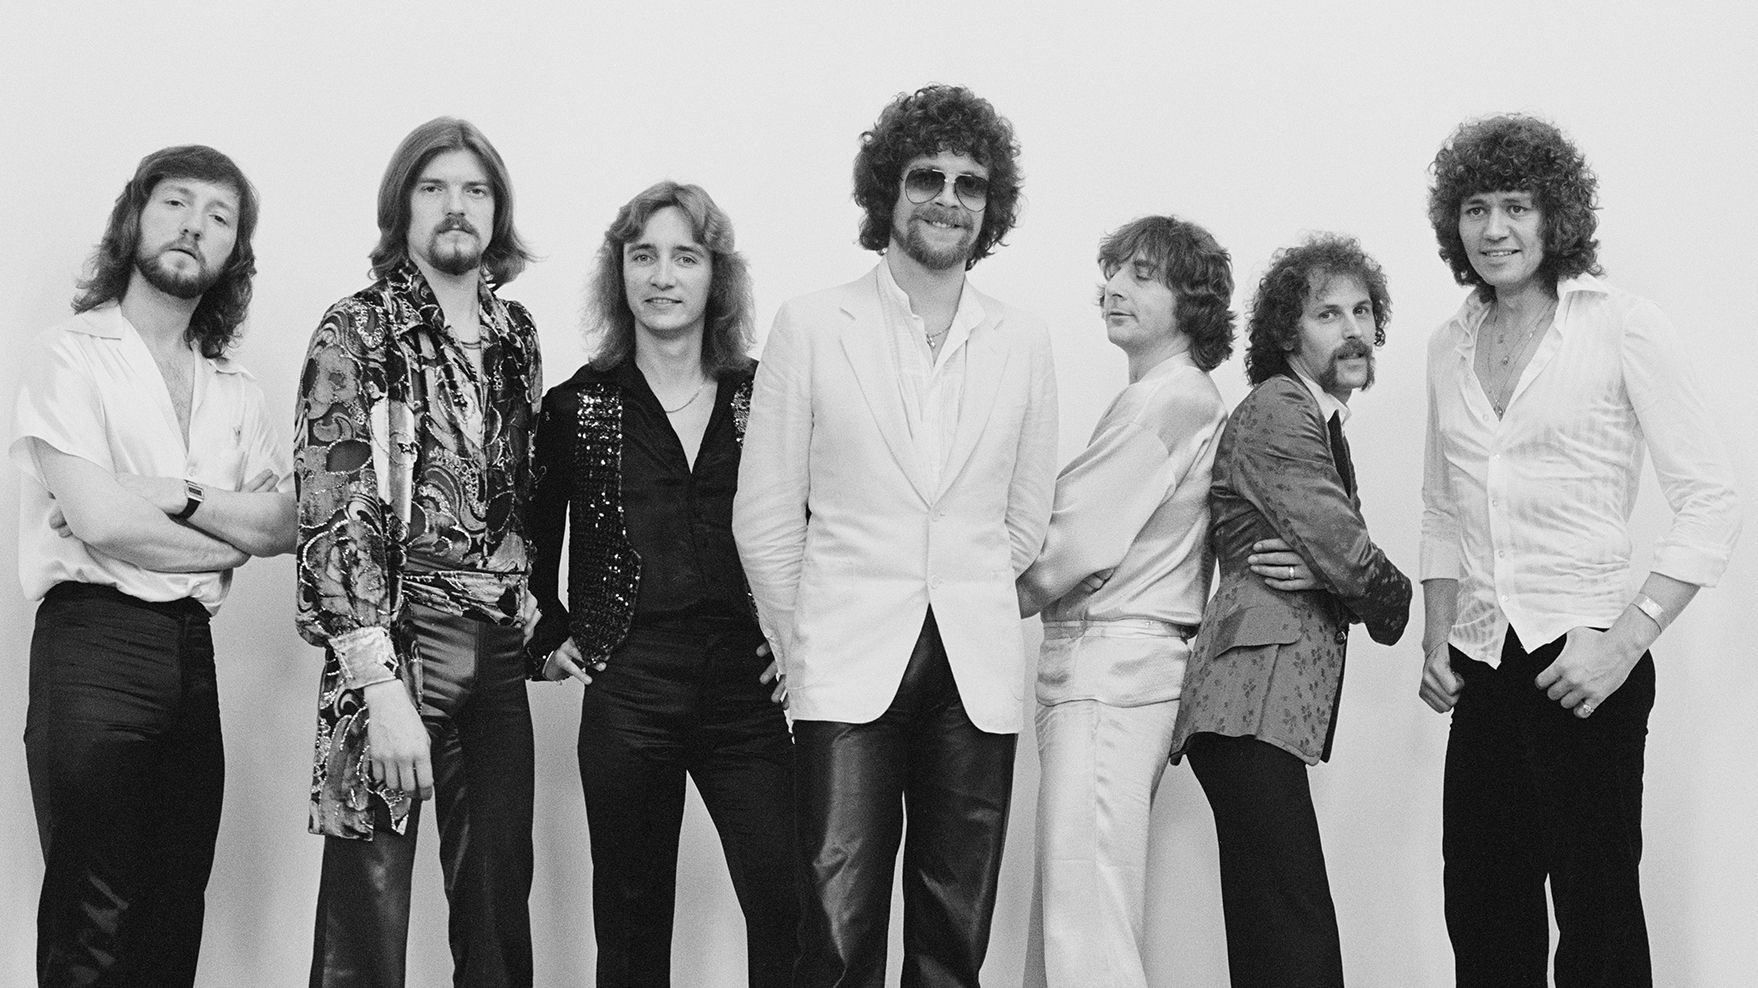 the biggest songs released by Electric Light Orchestra